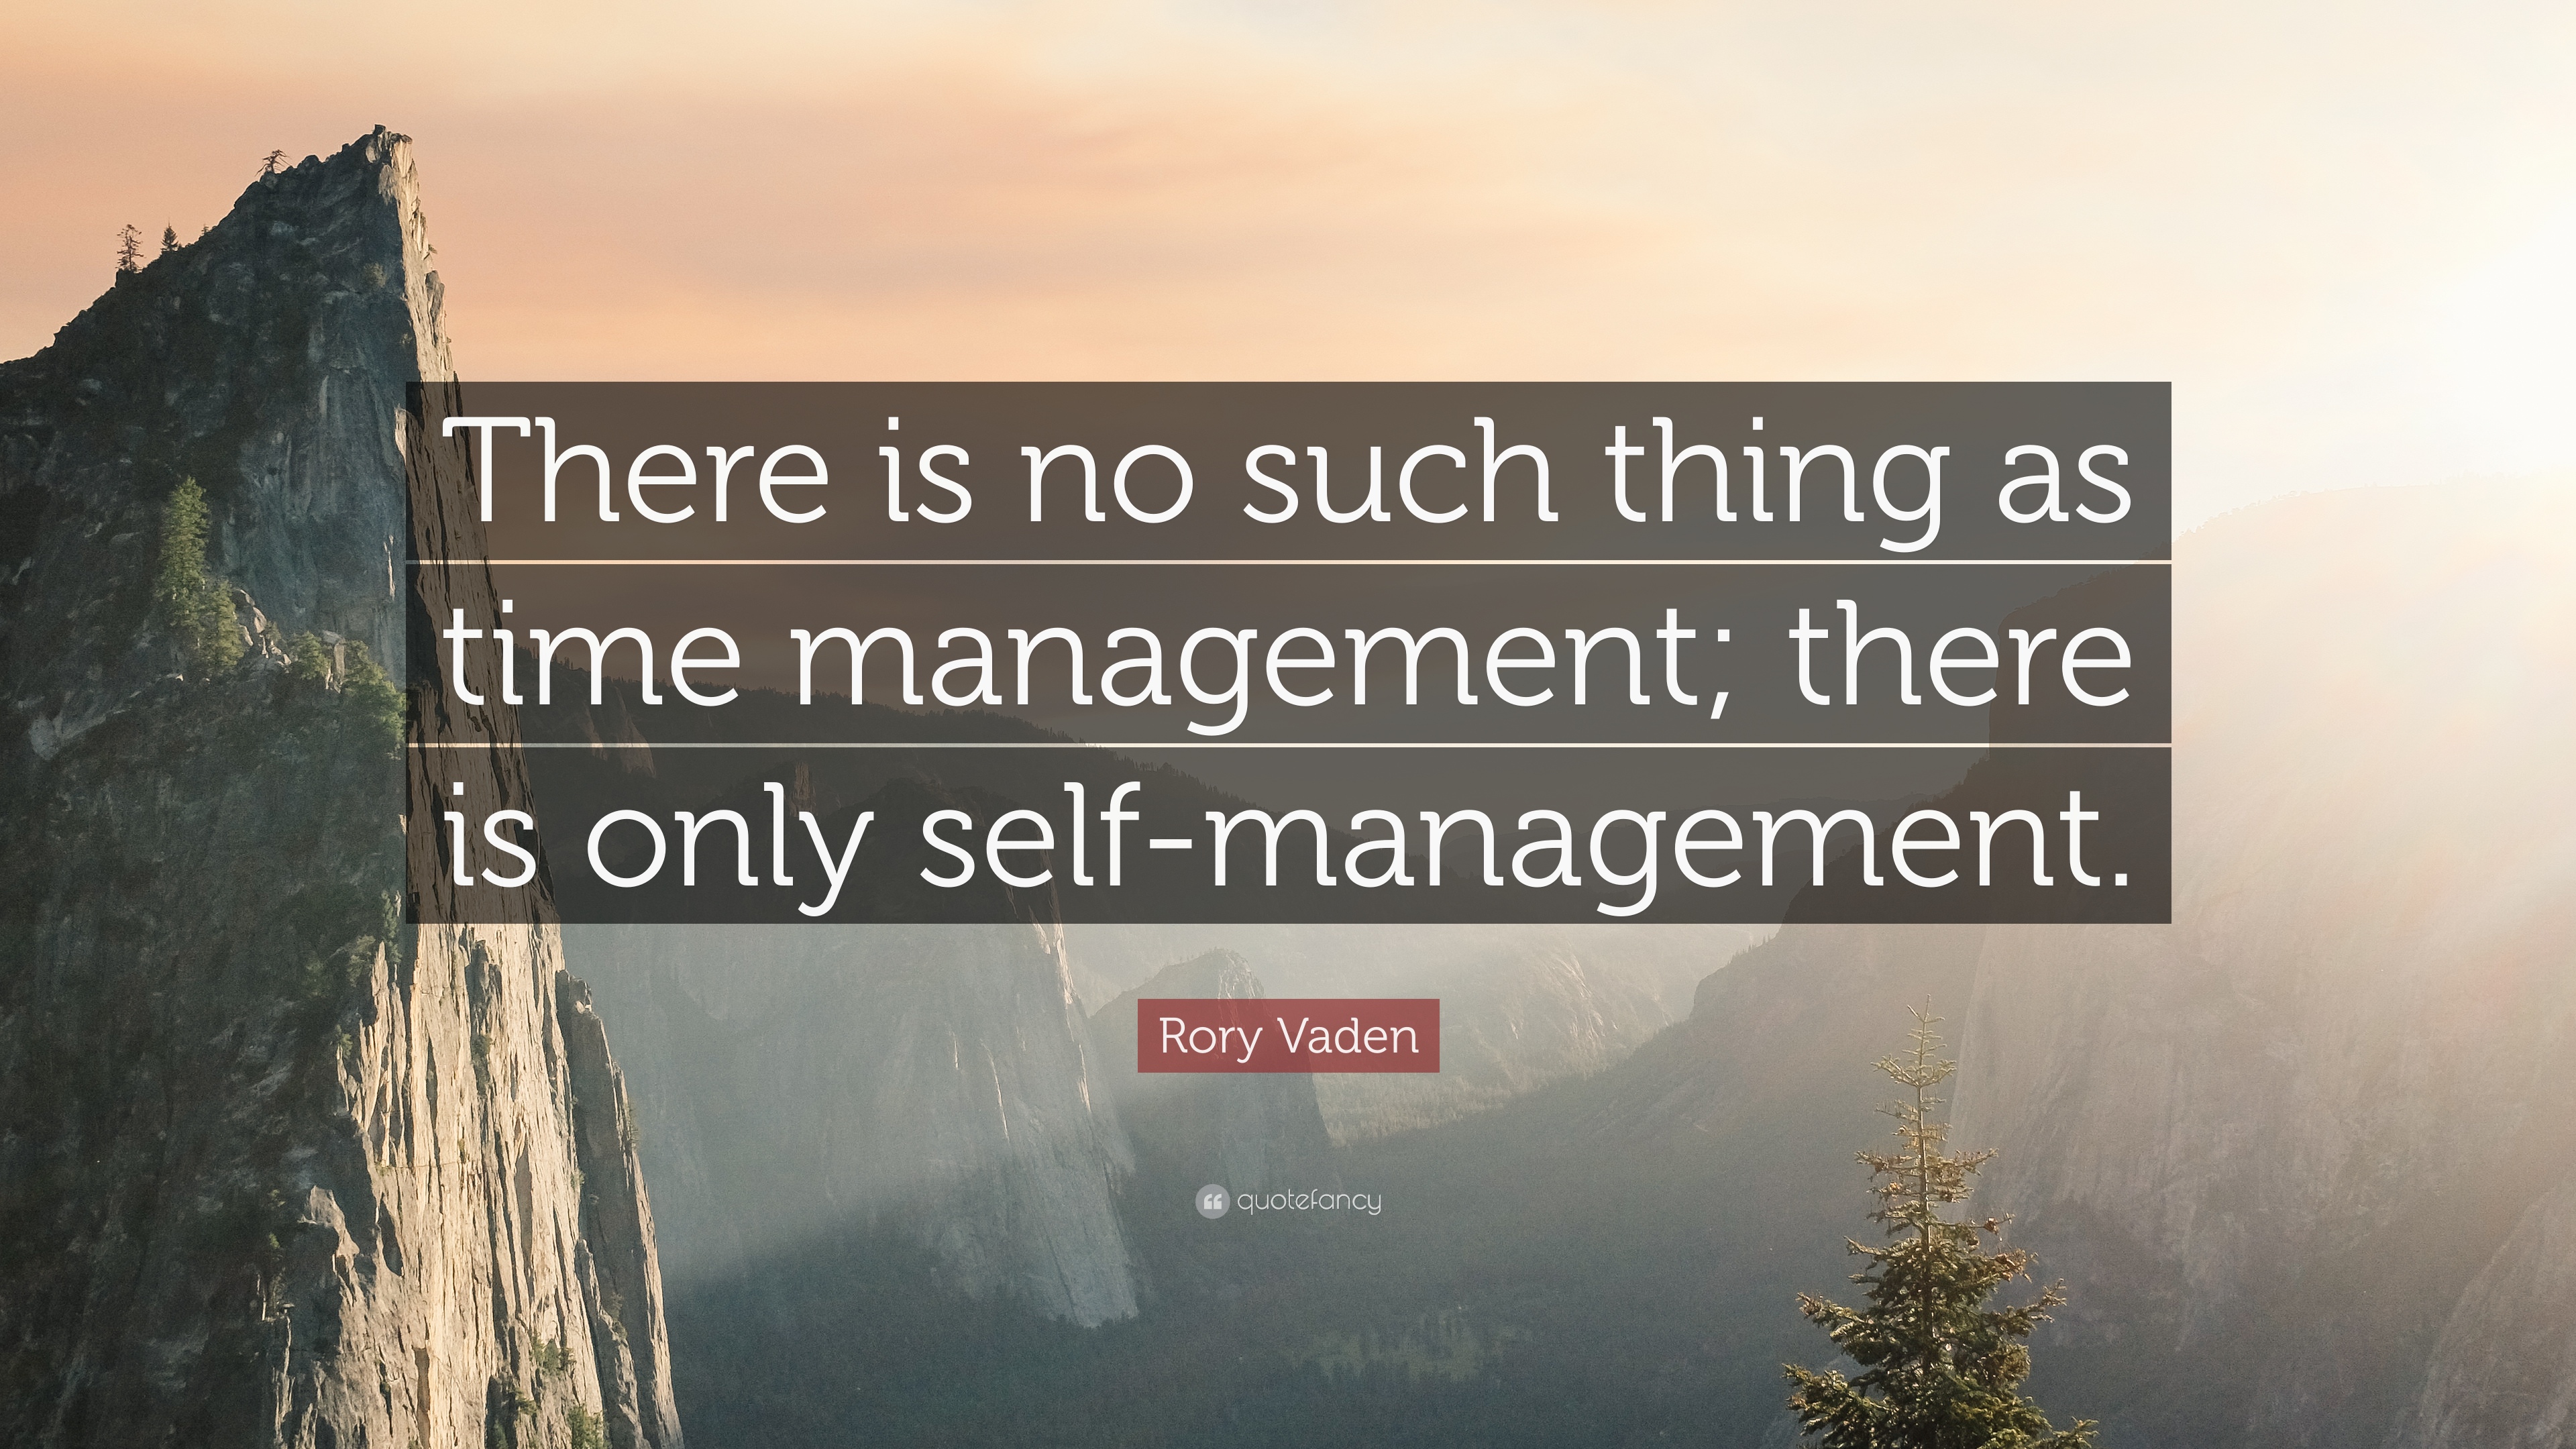 Rory Vaden Quote: “There is no such thing as time management